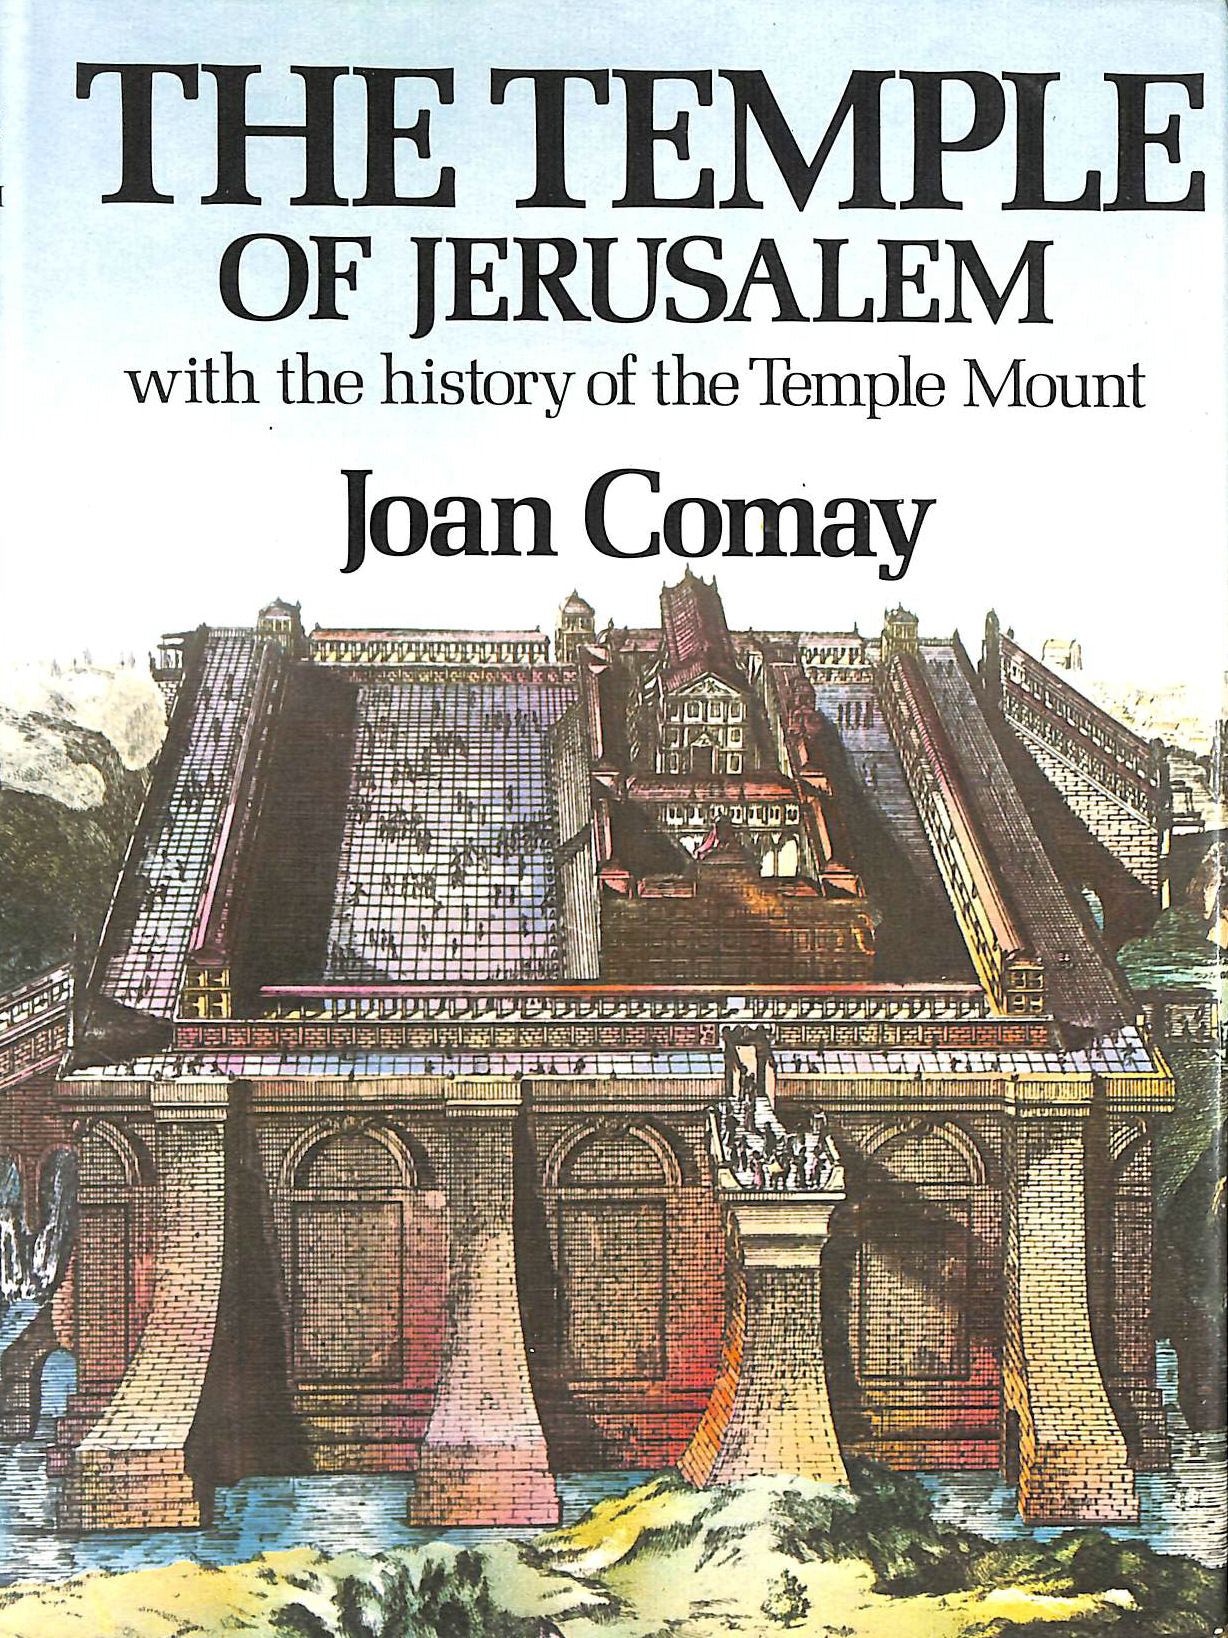 JOAN COMAY - The Temple of Jerusalem: With the history of the Temple Mount